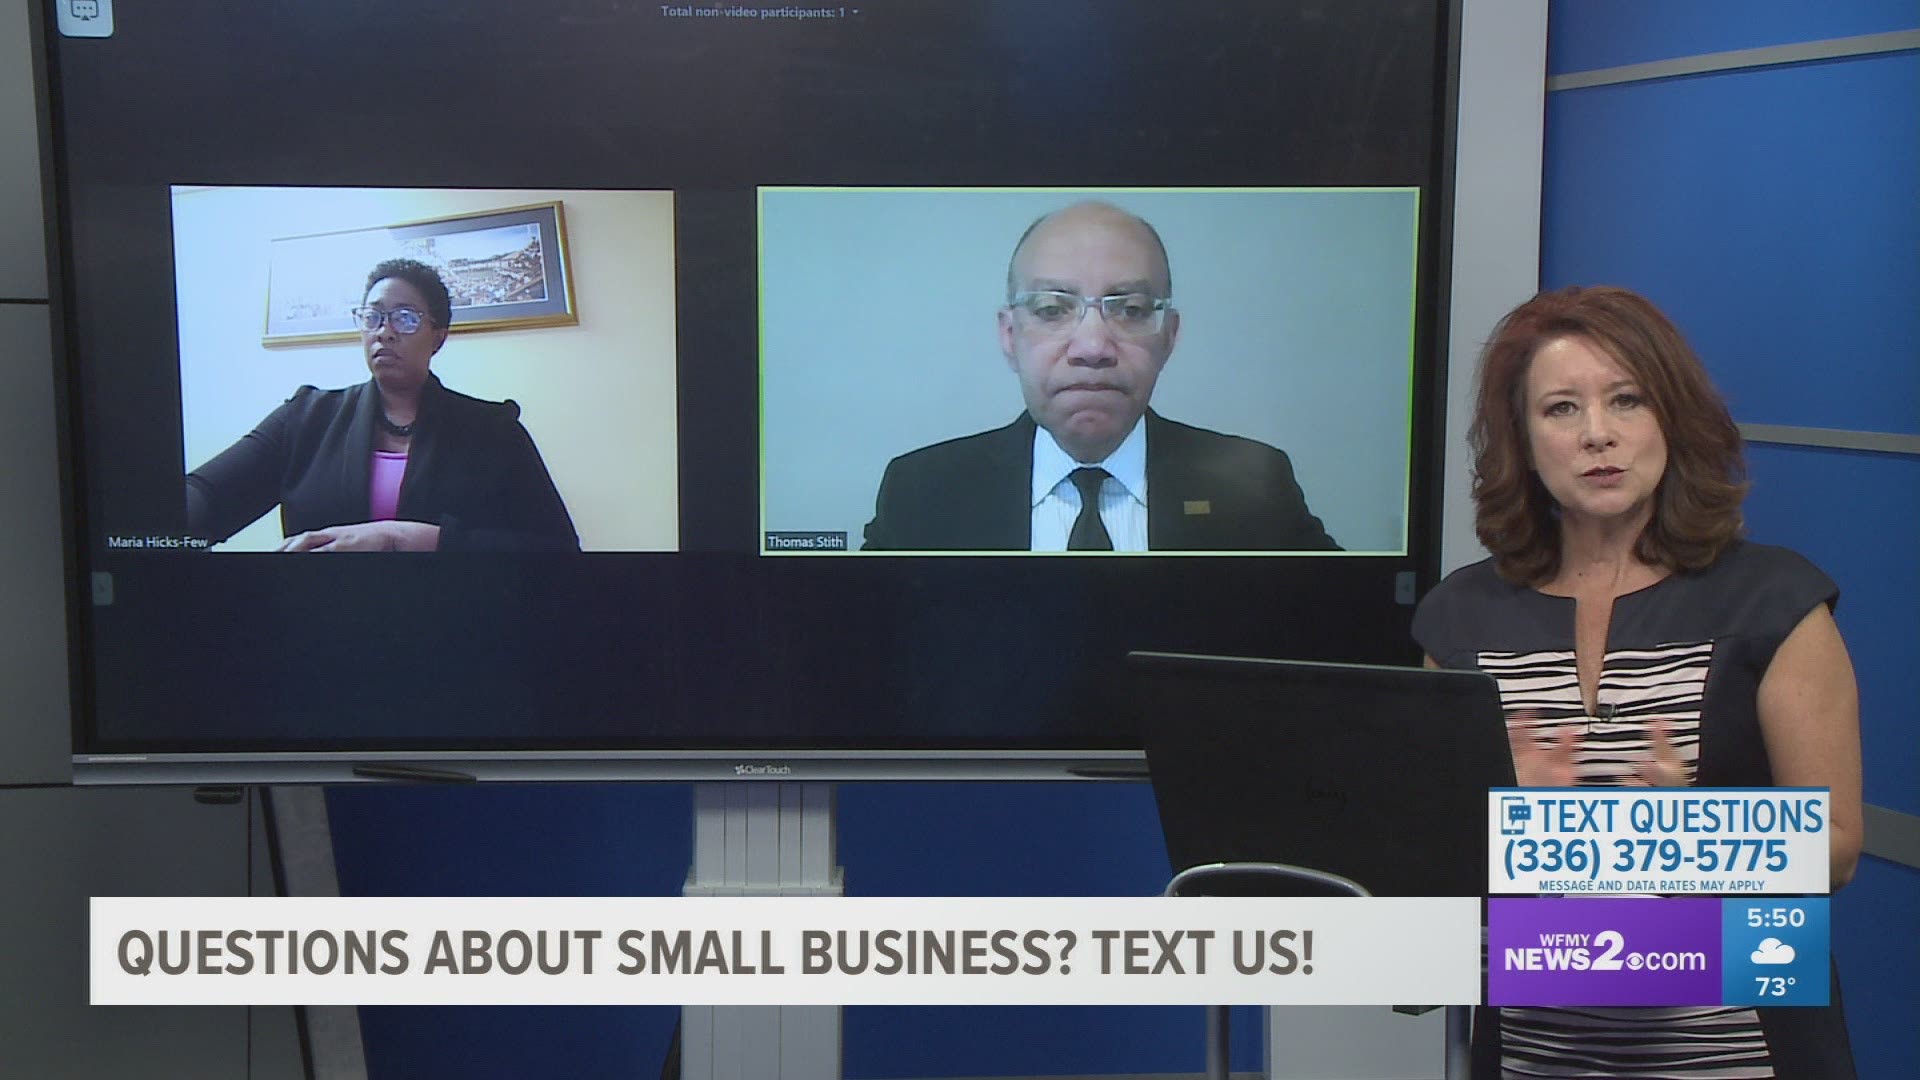 Maria Hicks-Few and Thomas Stith with the City of Greensboro answer your small business questions.